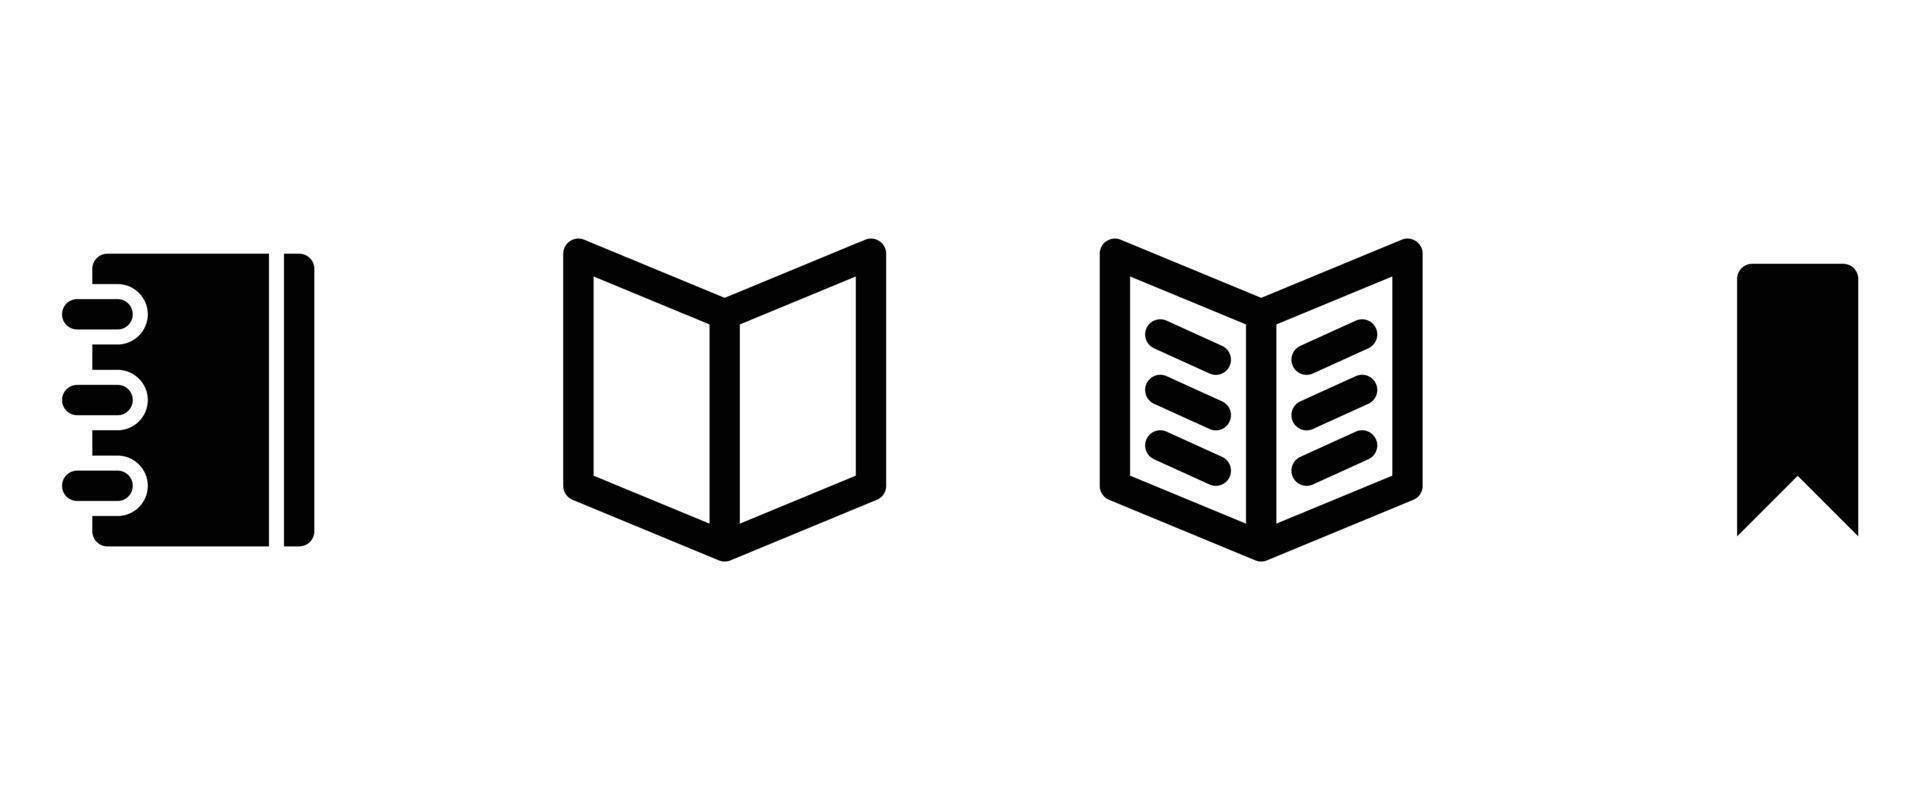 book icon . web icon set . icons collection. Simple vector illustration.